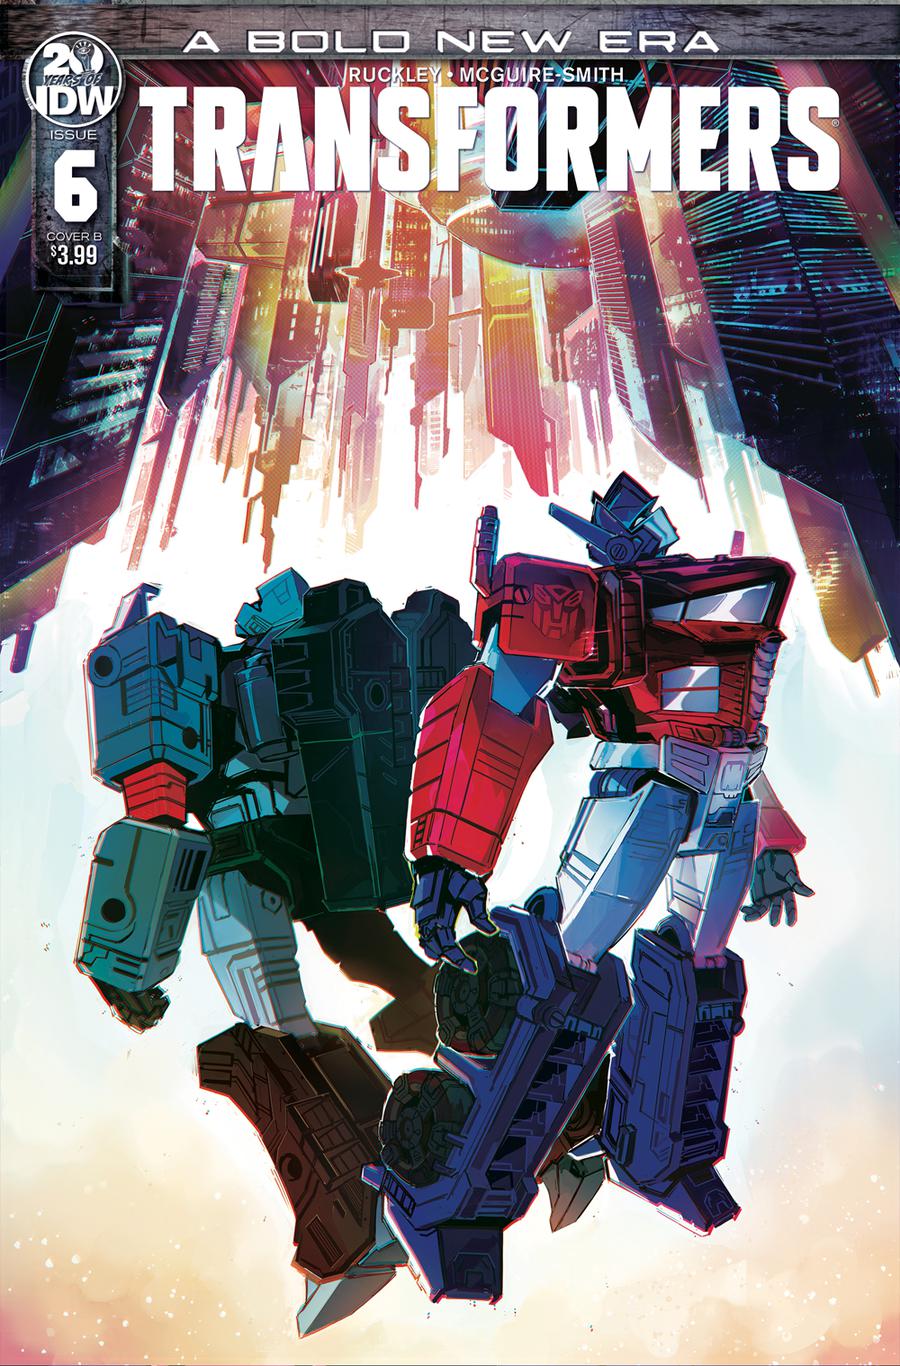 Transformers Vol 4 #6 Cover B Variant Bethany McGuire-Smith Cover